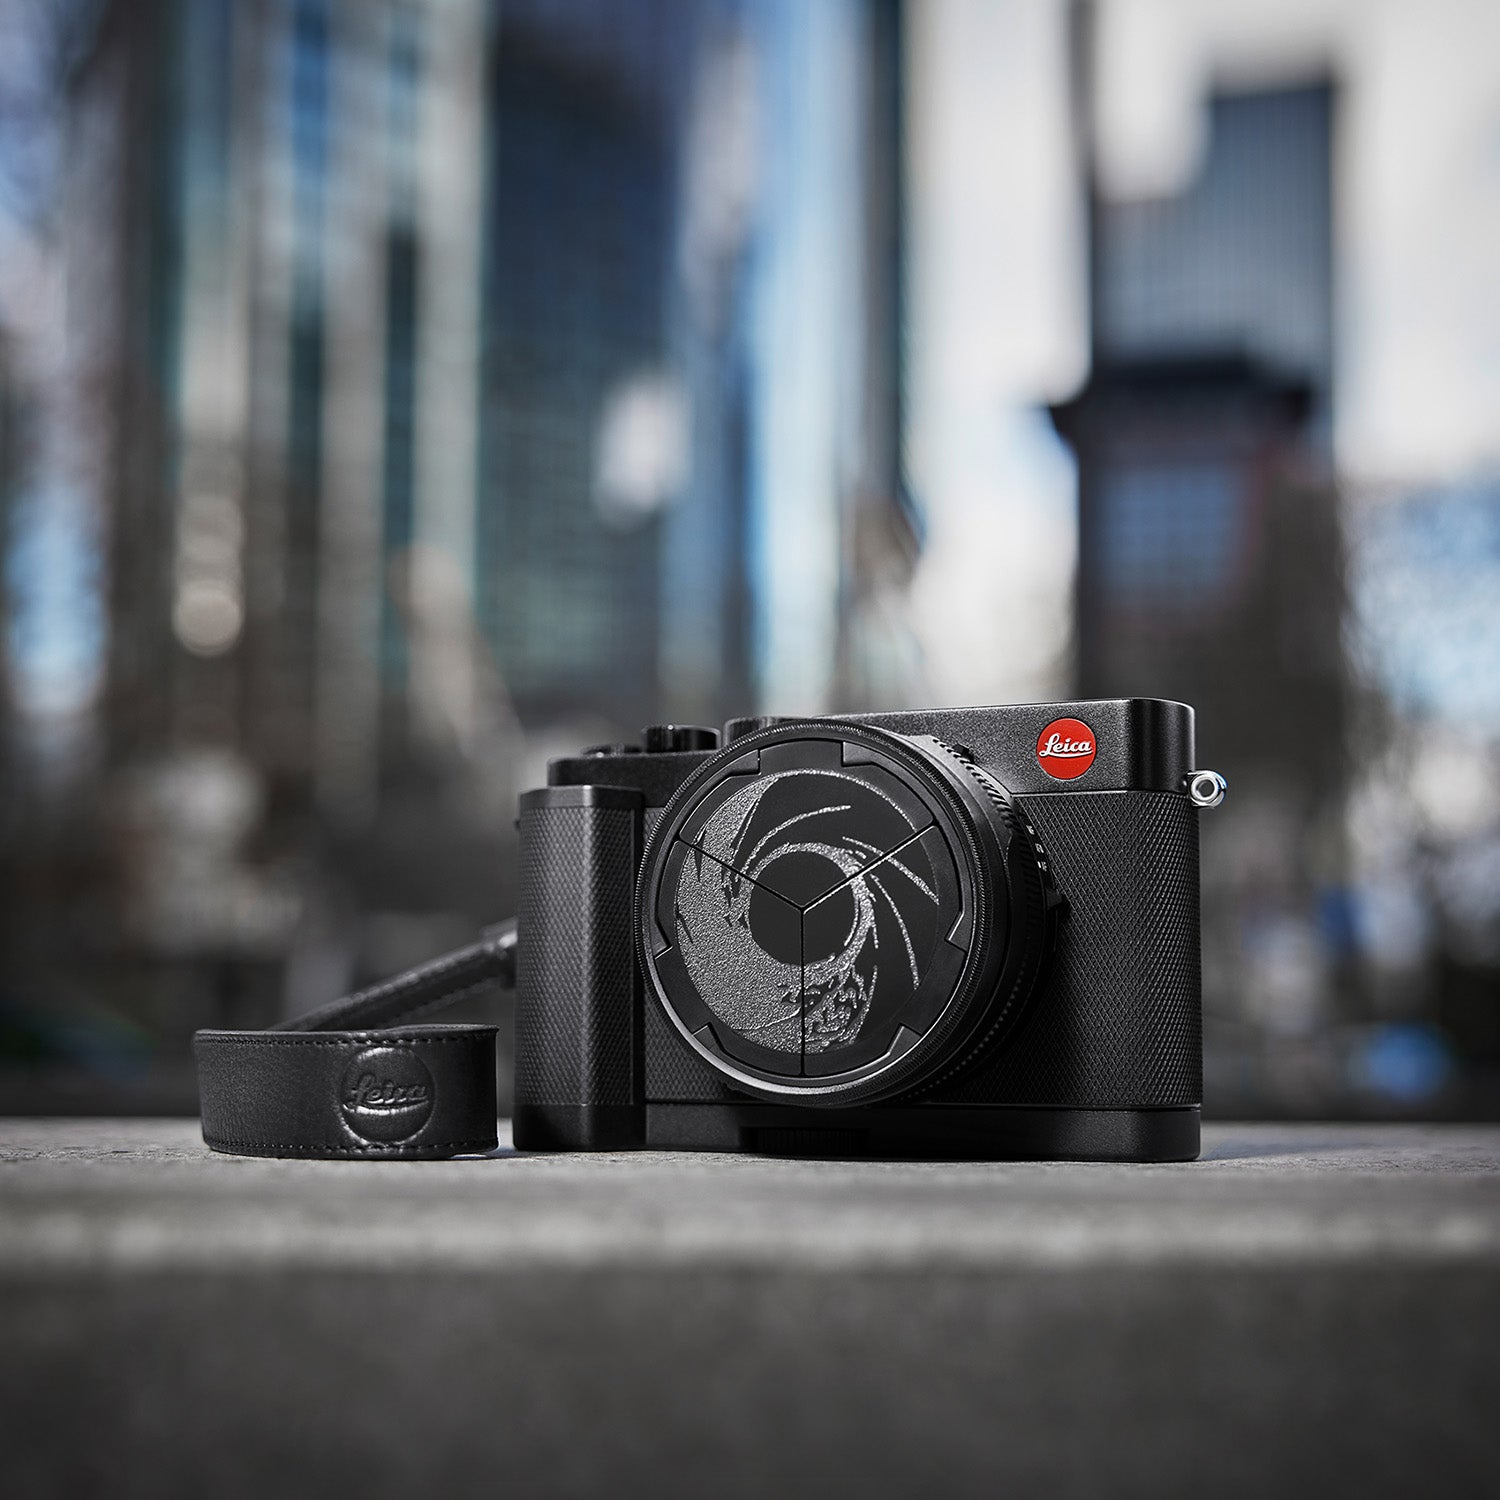 James Bond Leica D-Lux 7 007 Camera - Numbered Edition